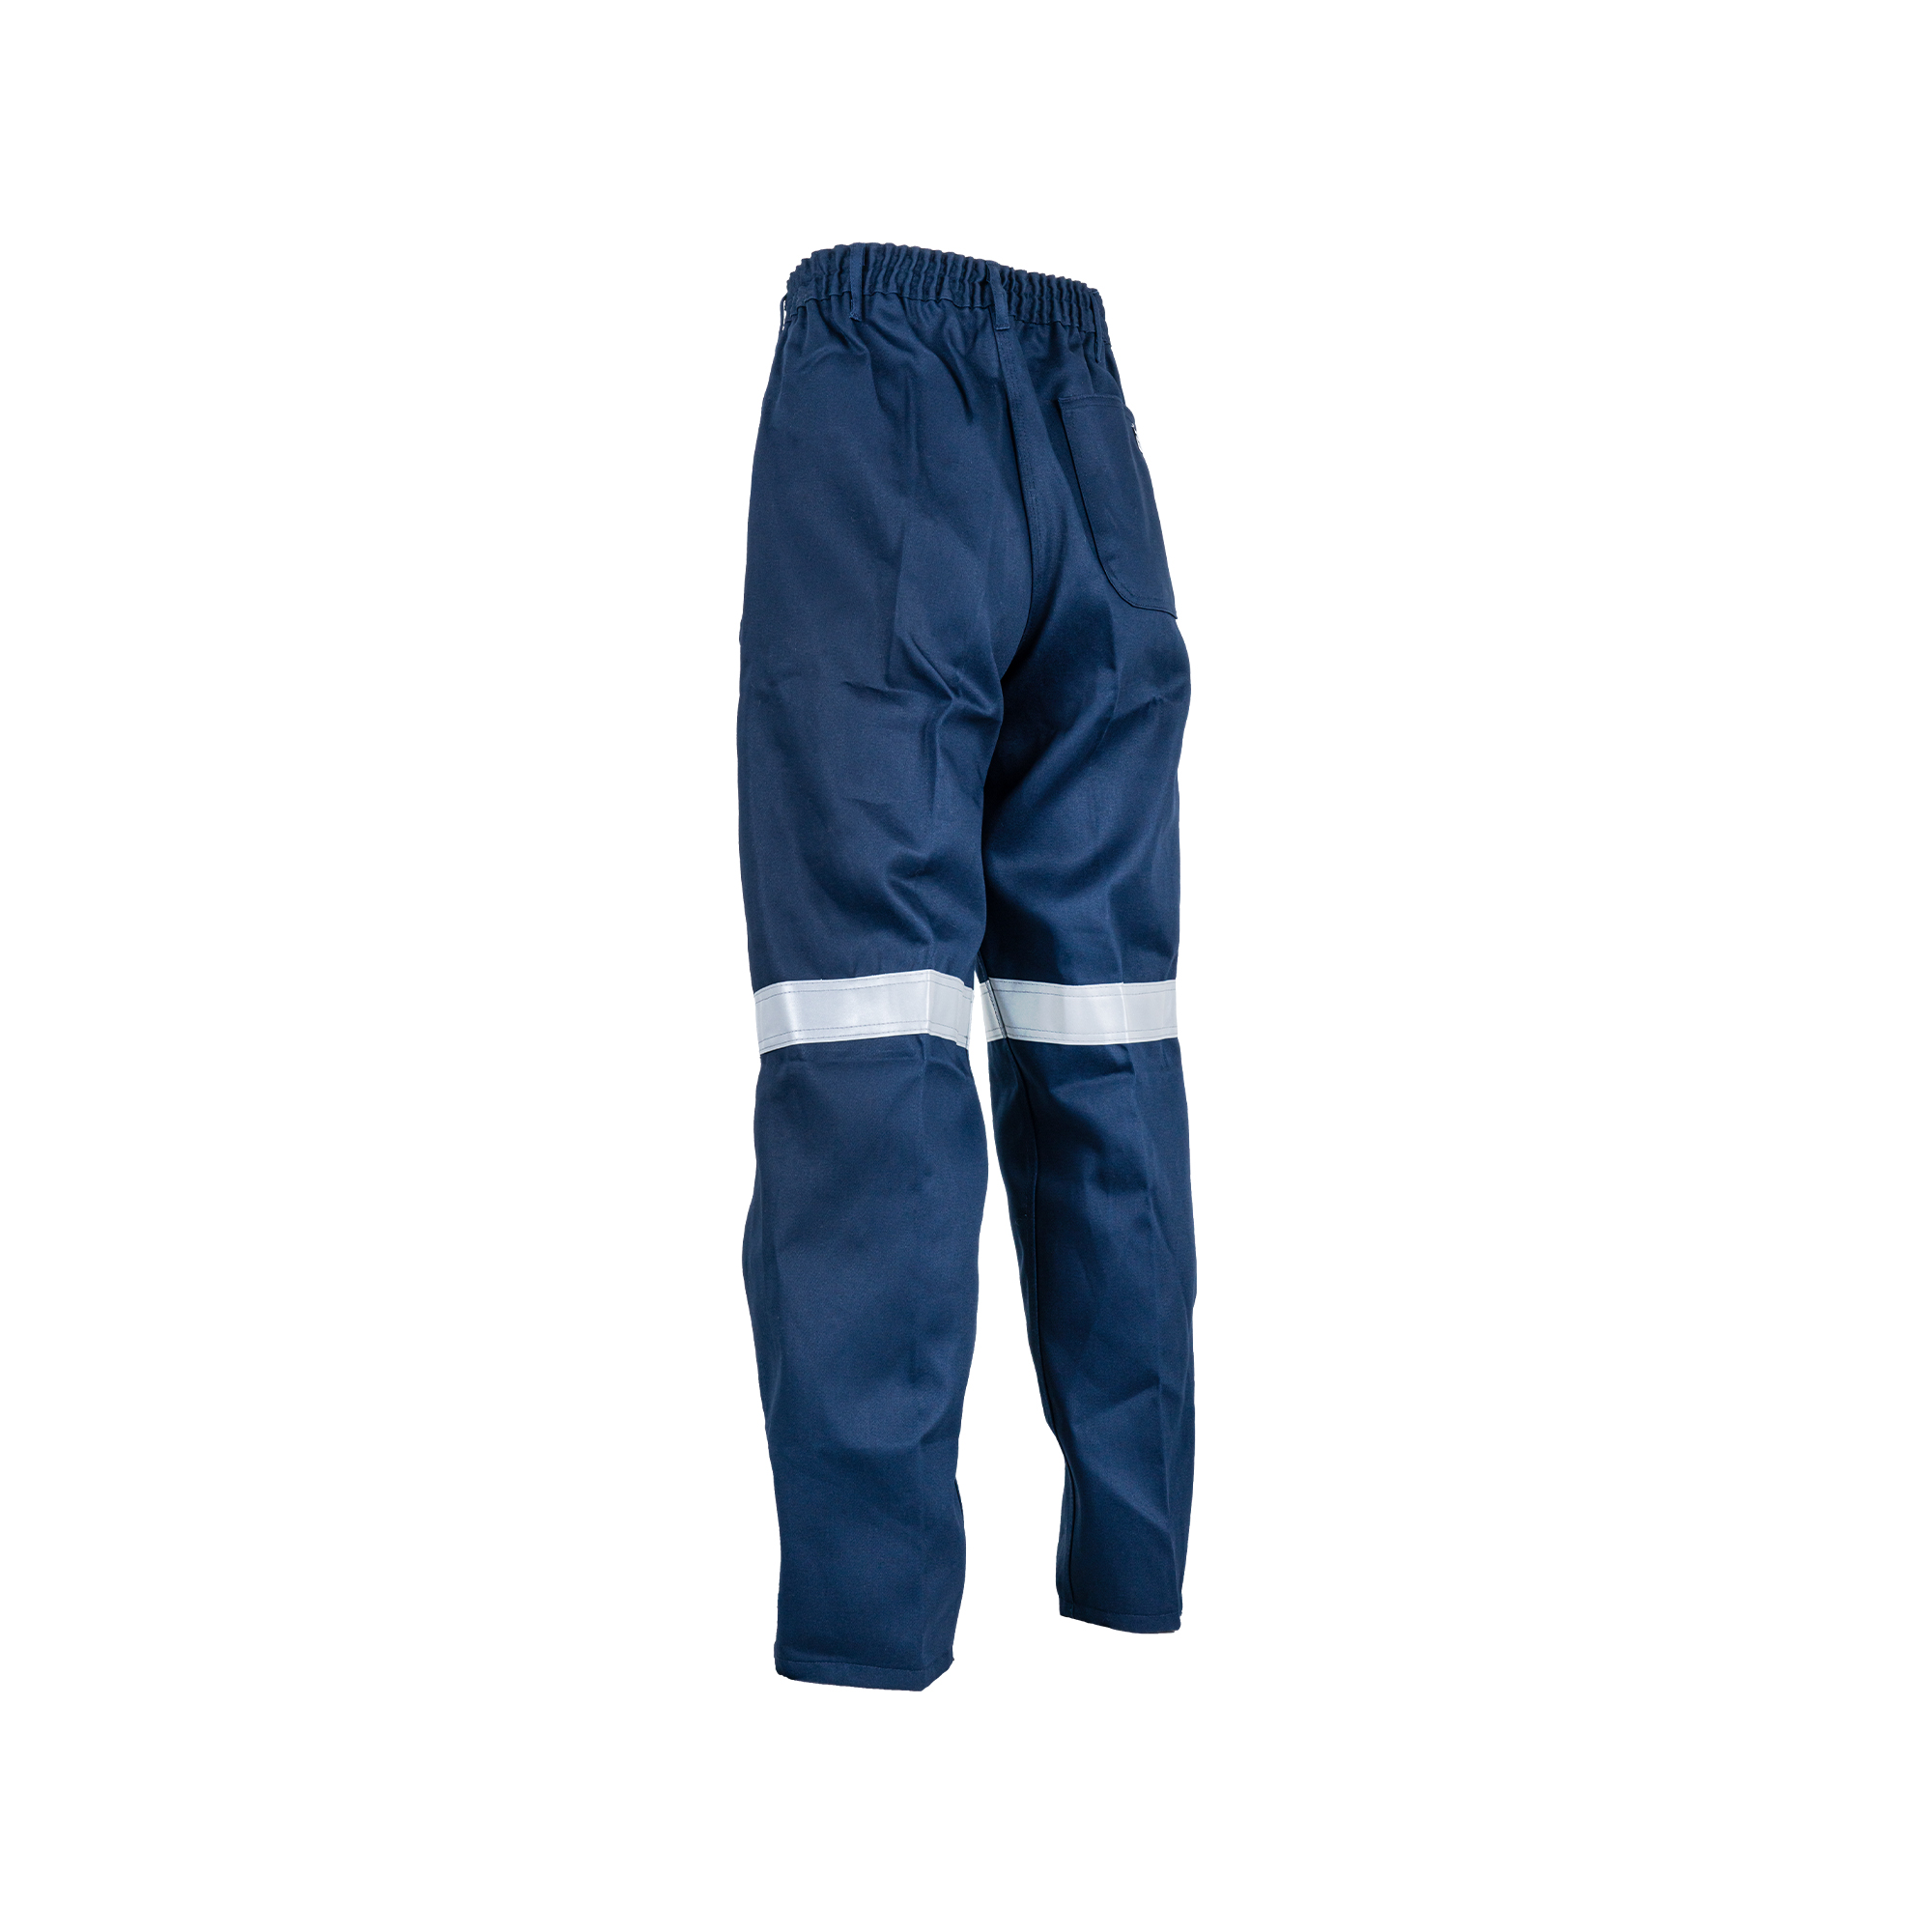 Sweet-Orr Acid Flame Overall Trousers Navy Blue - Protekta Safety Gear